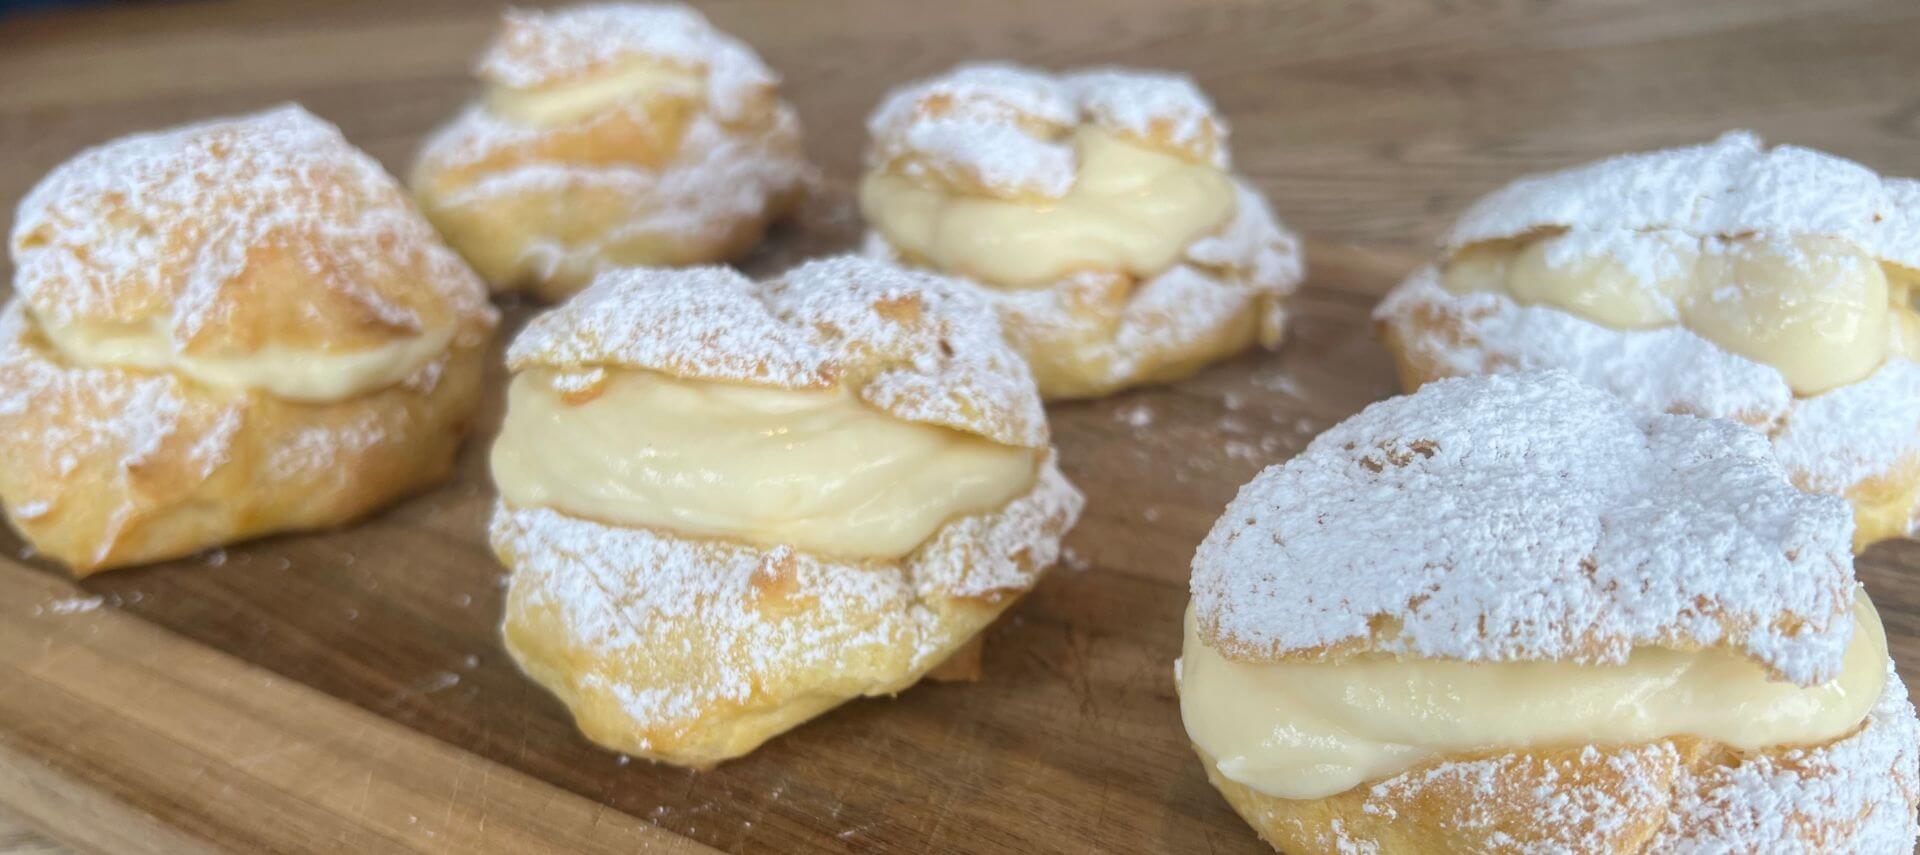 A wooden board with six large cream puffs filled with pastry cream and sprinkled with powdered sugar